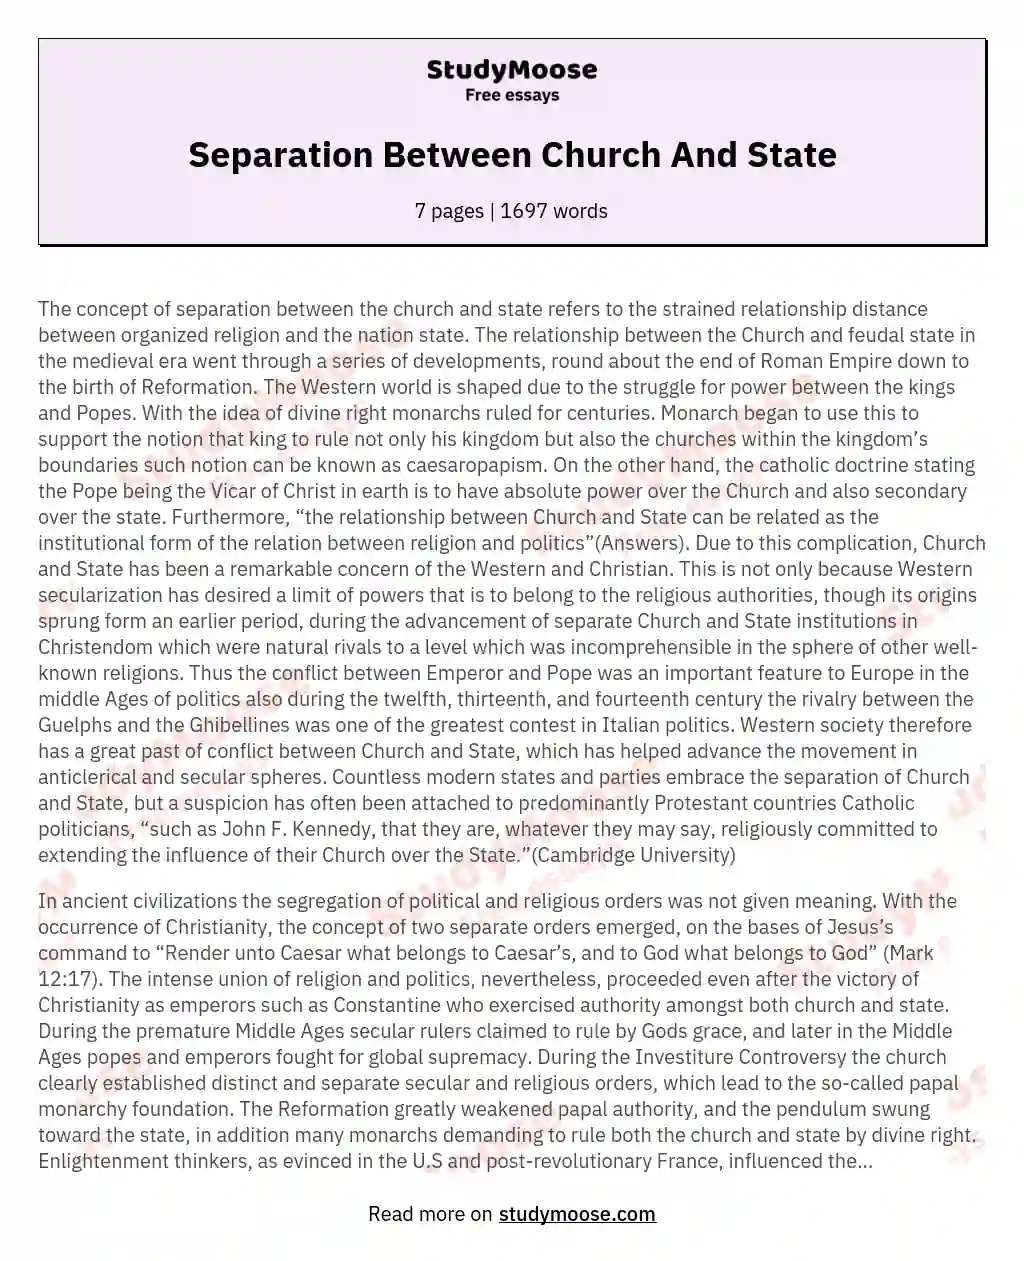 Separation Between Church And State essay